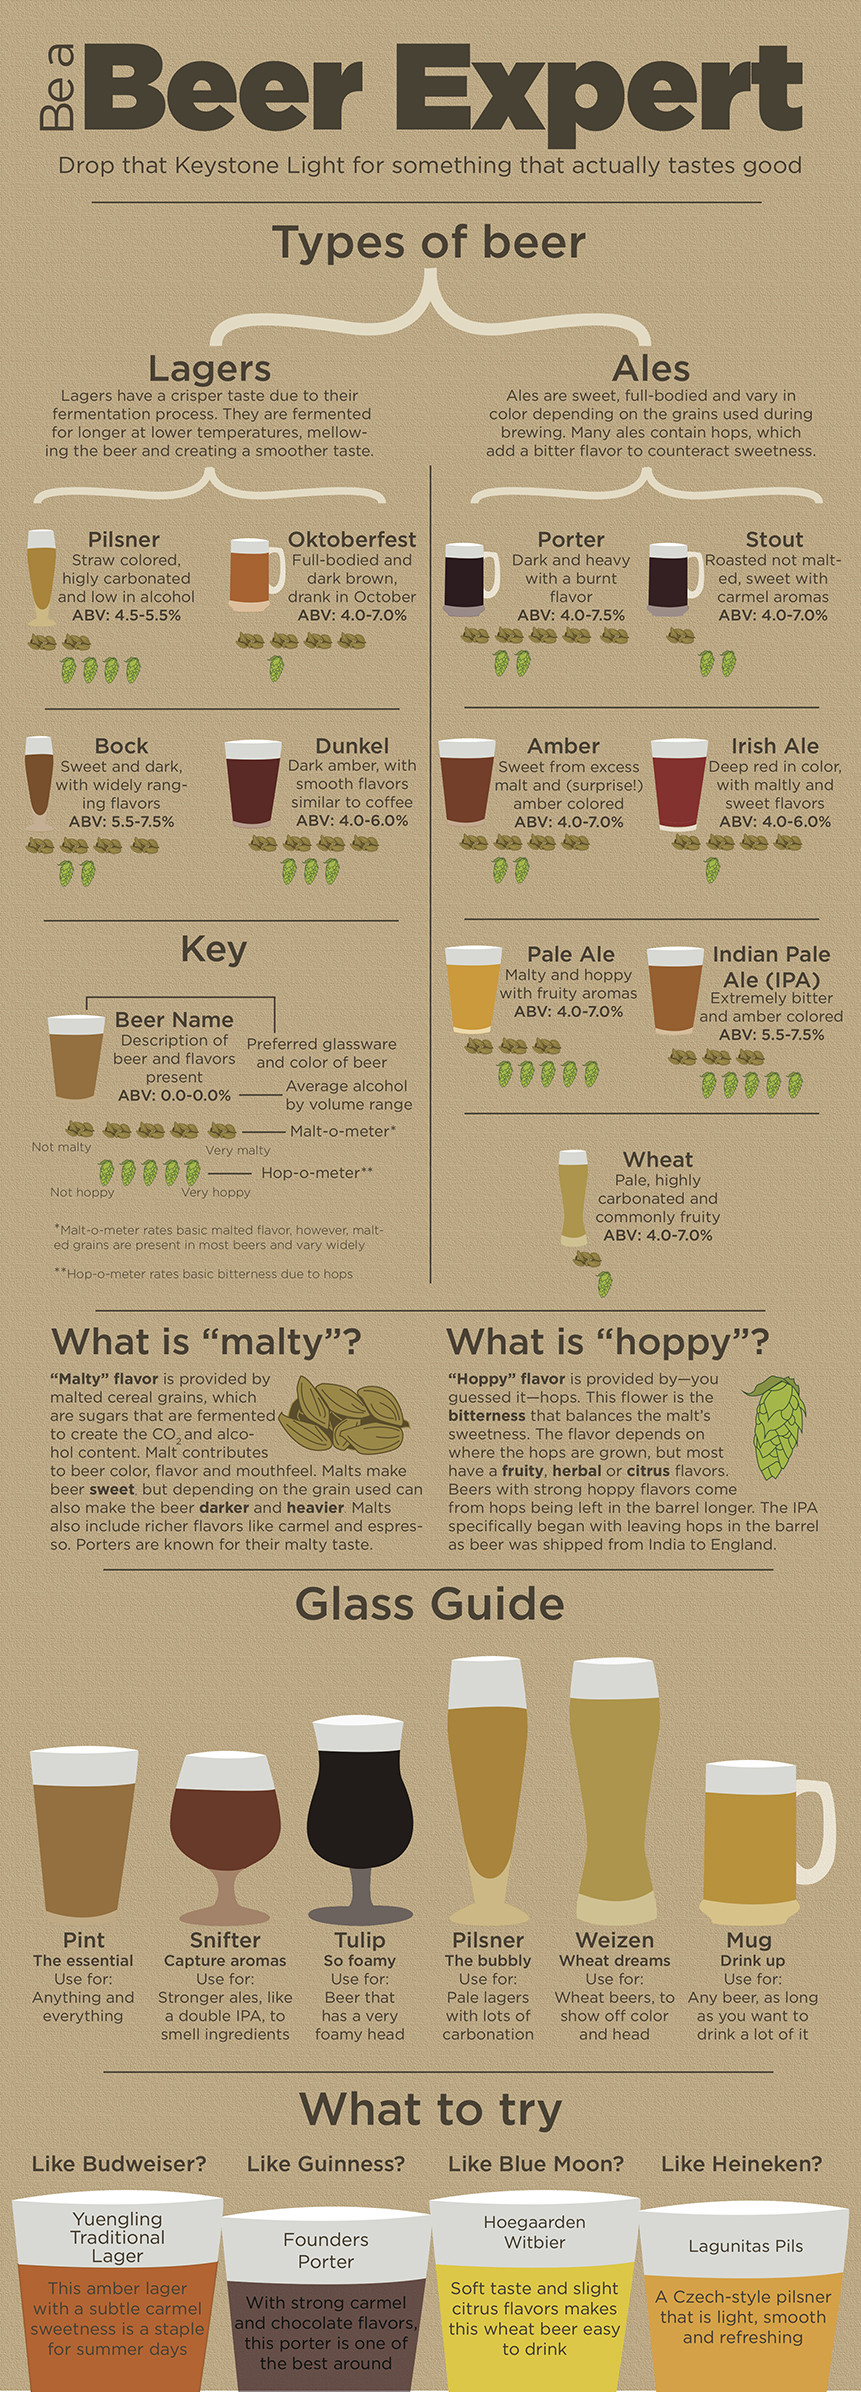 beer expert - Beer Expert Types of beer Lagers What is alty What is happy Glass Guide What to try